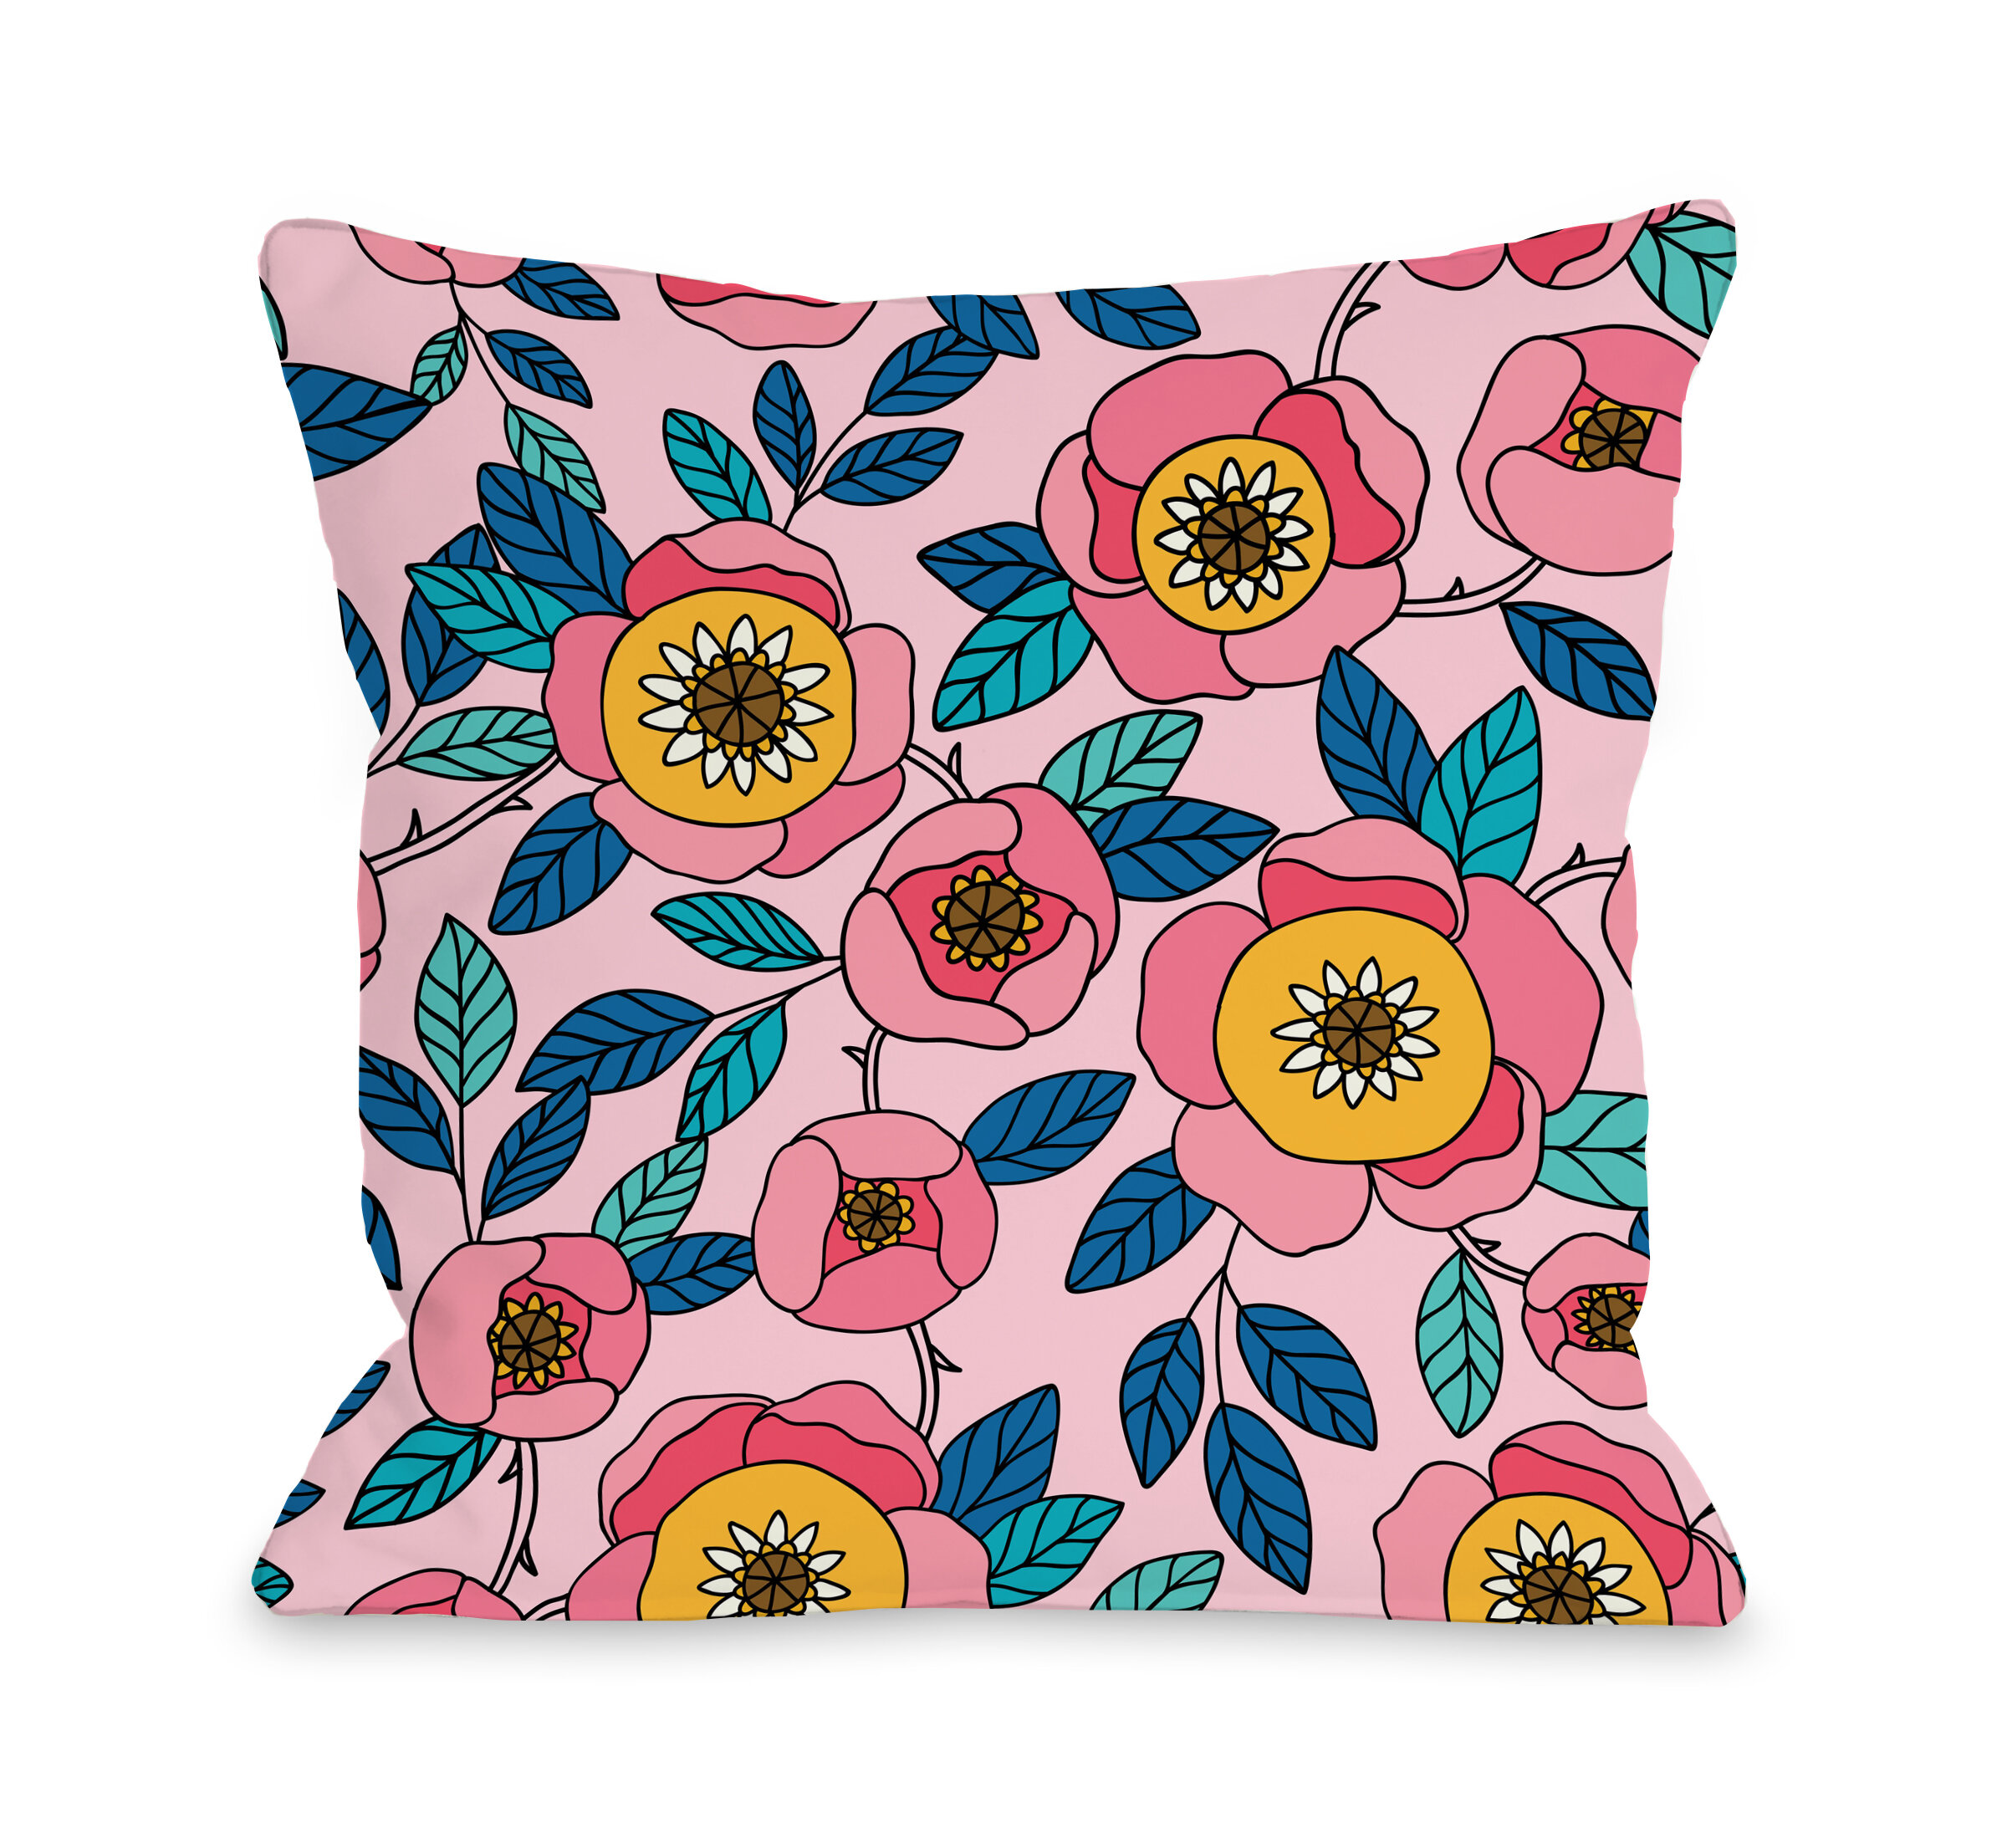 16x16 It's Just Allergies Throw Pillow Multicolor 